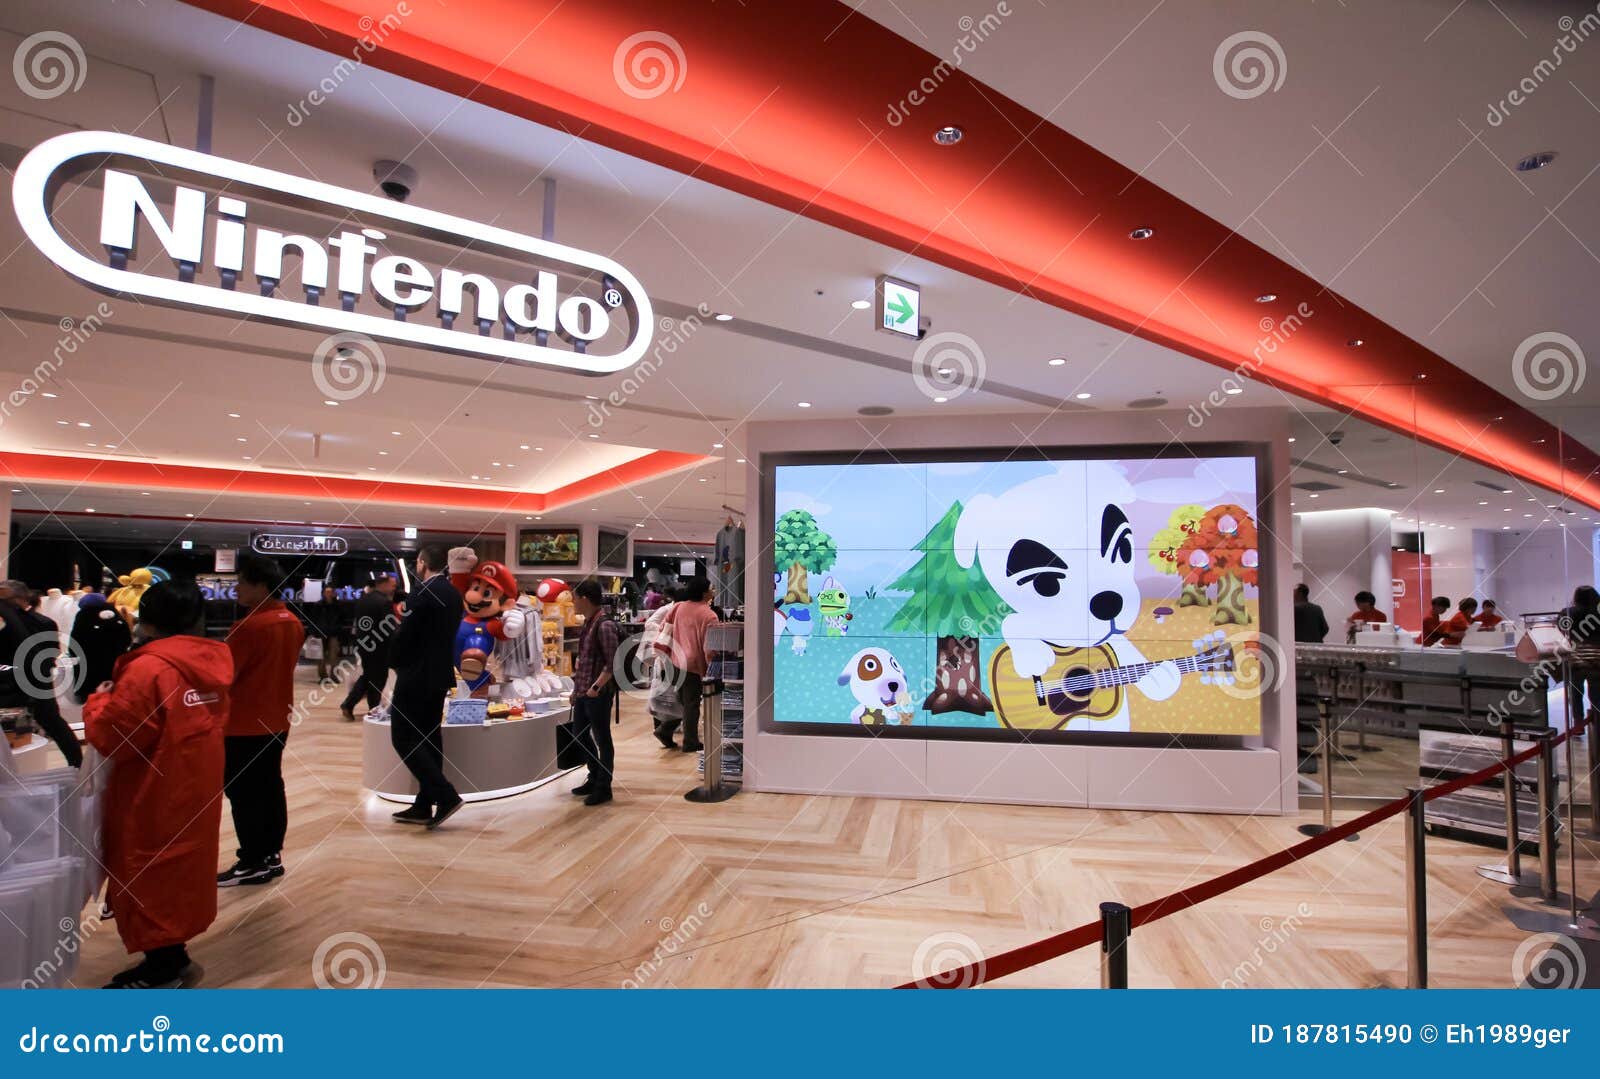 Entrance Area of the Store Editorial Image - Image merchandise, character: